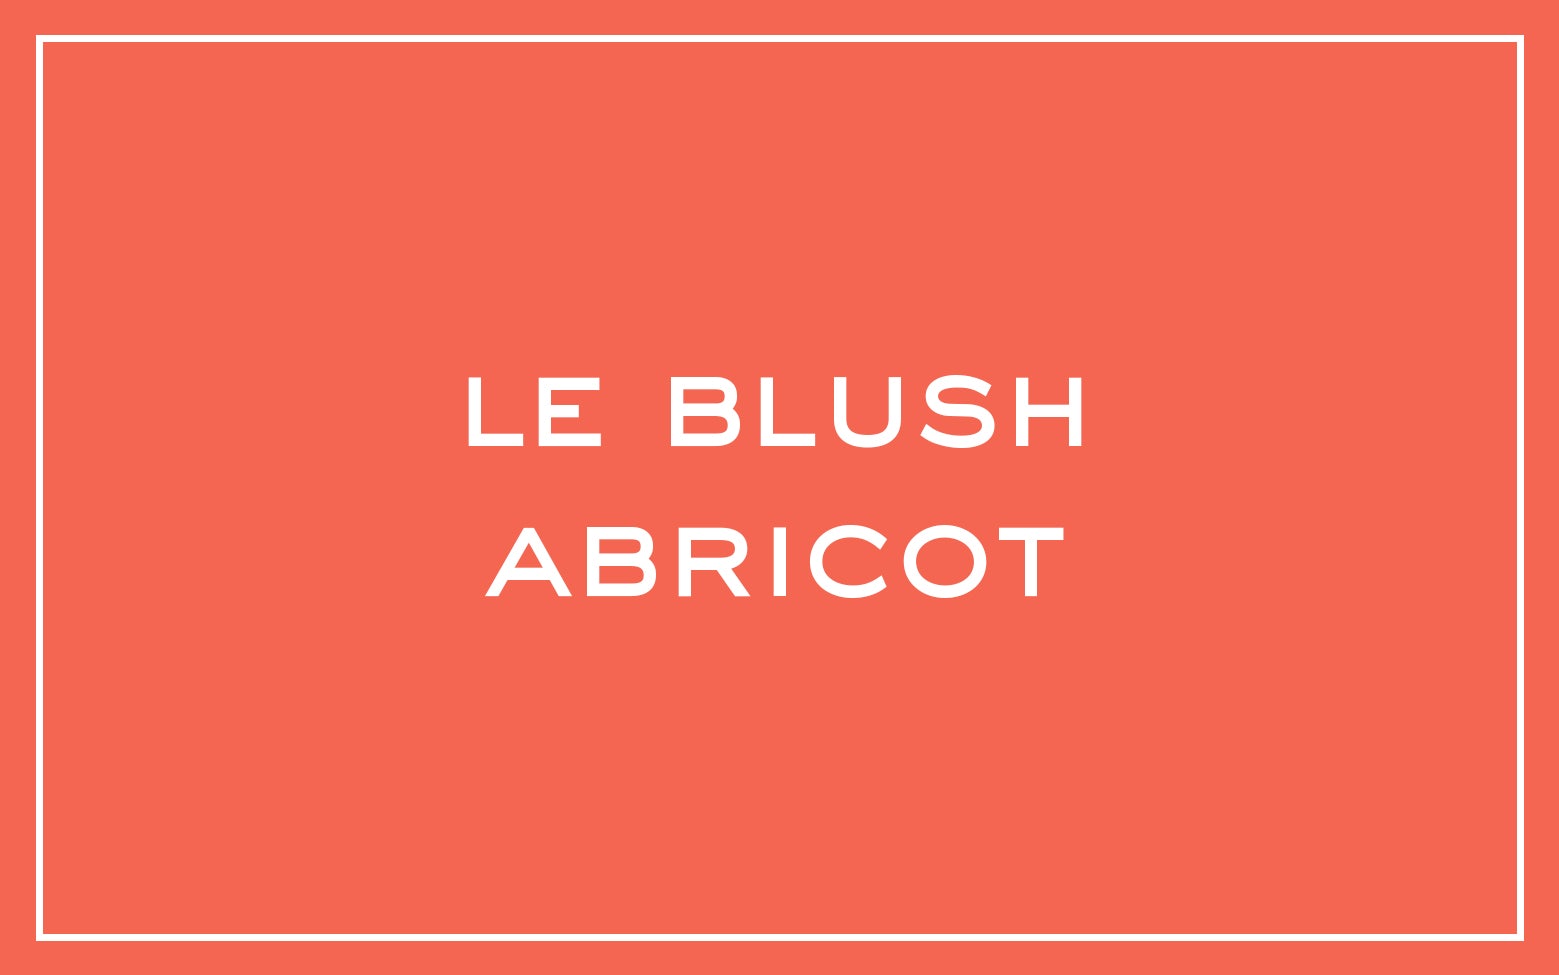 La bouche rouge The Apricot Blush swatch with text